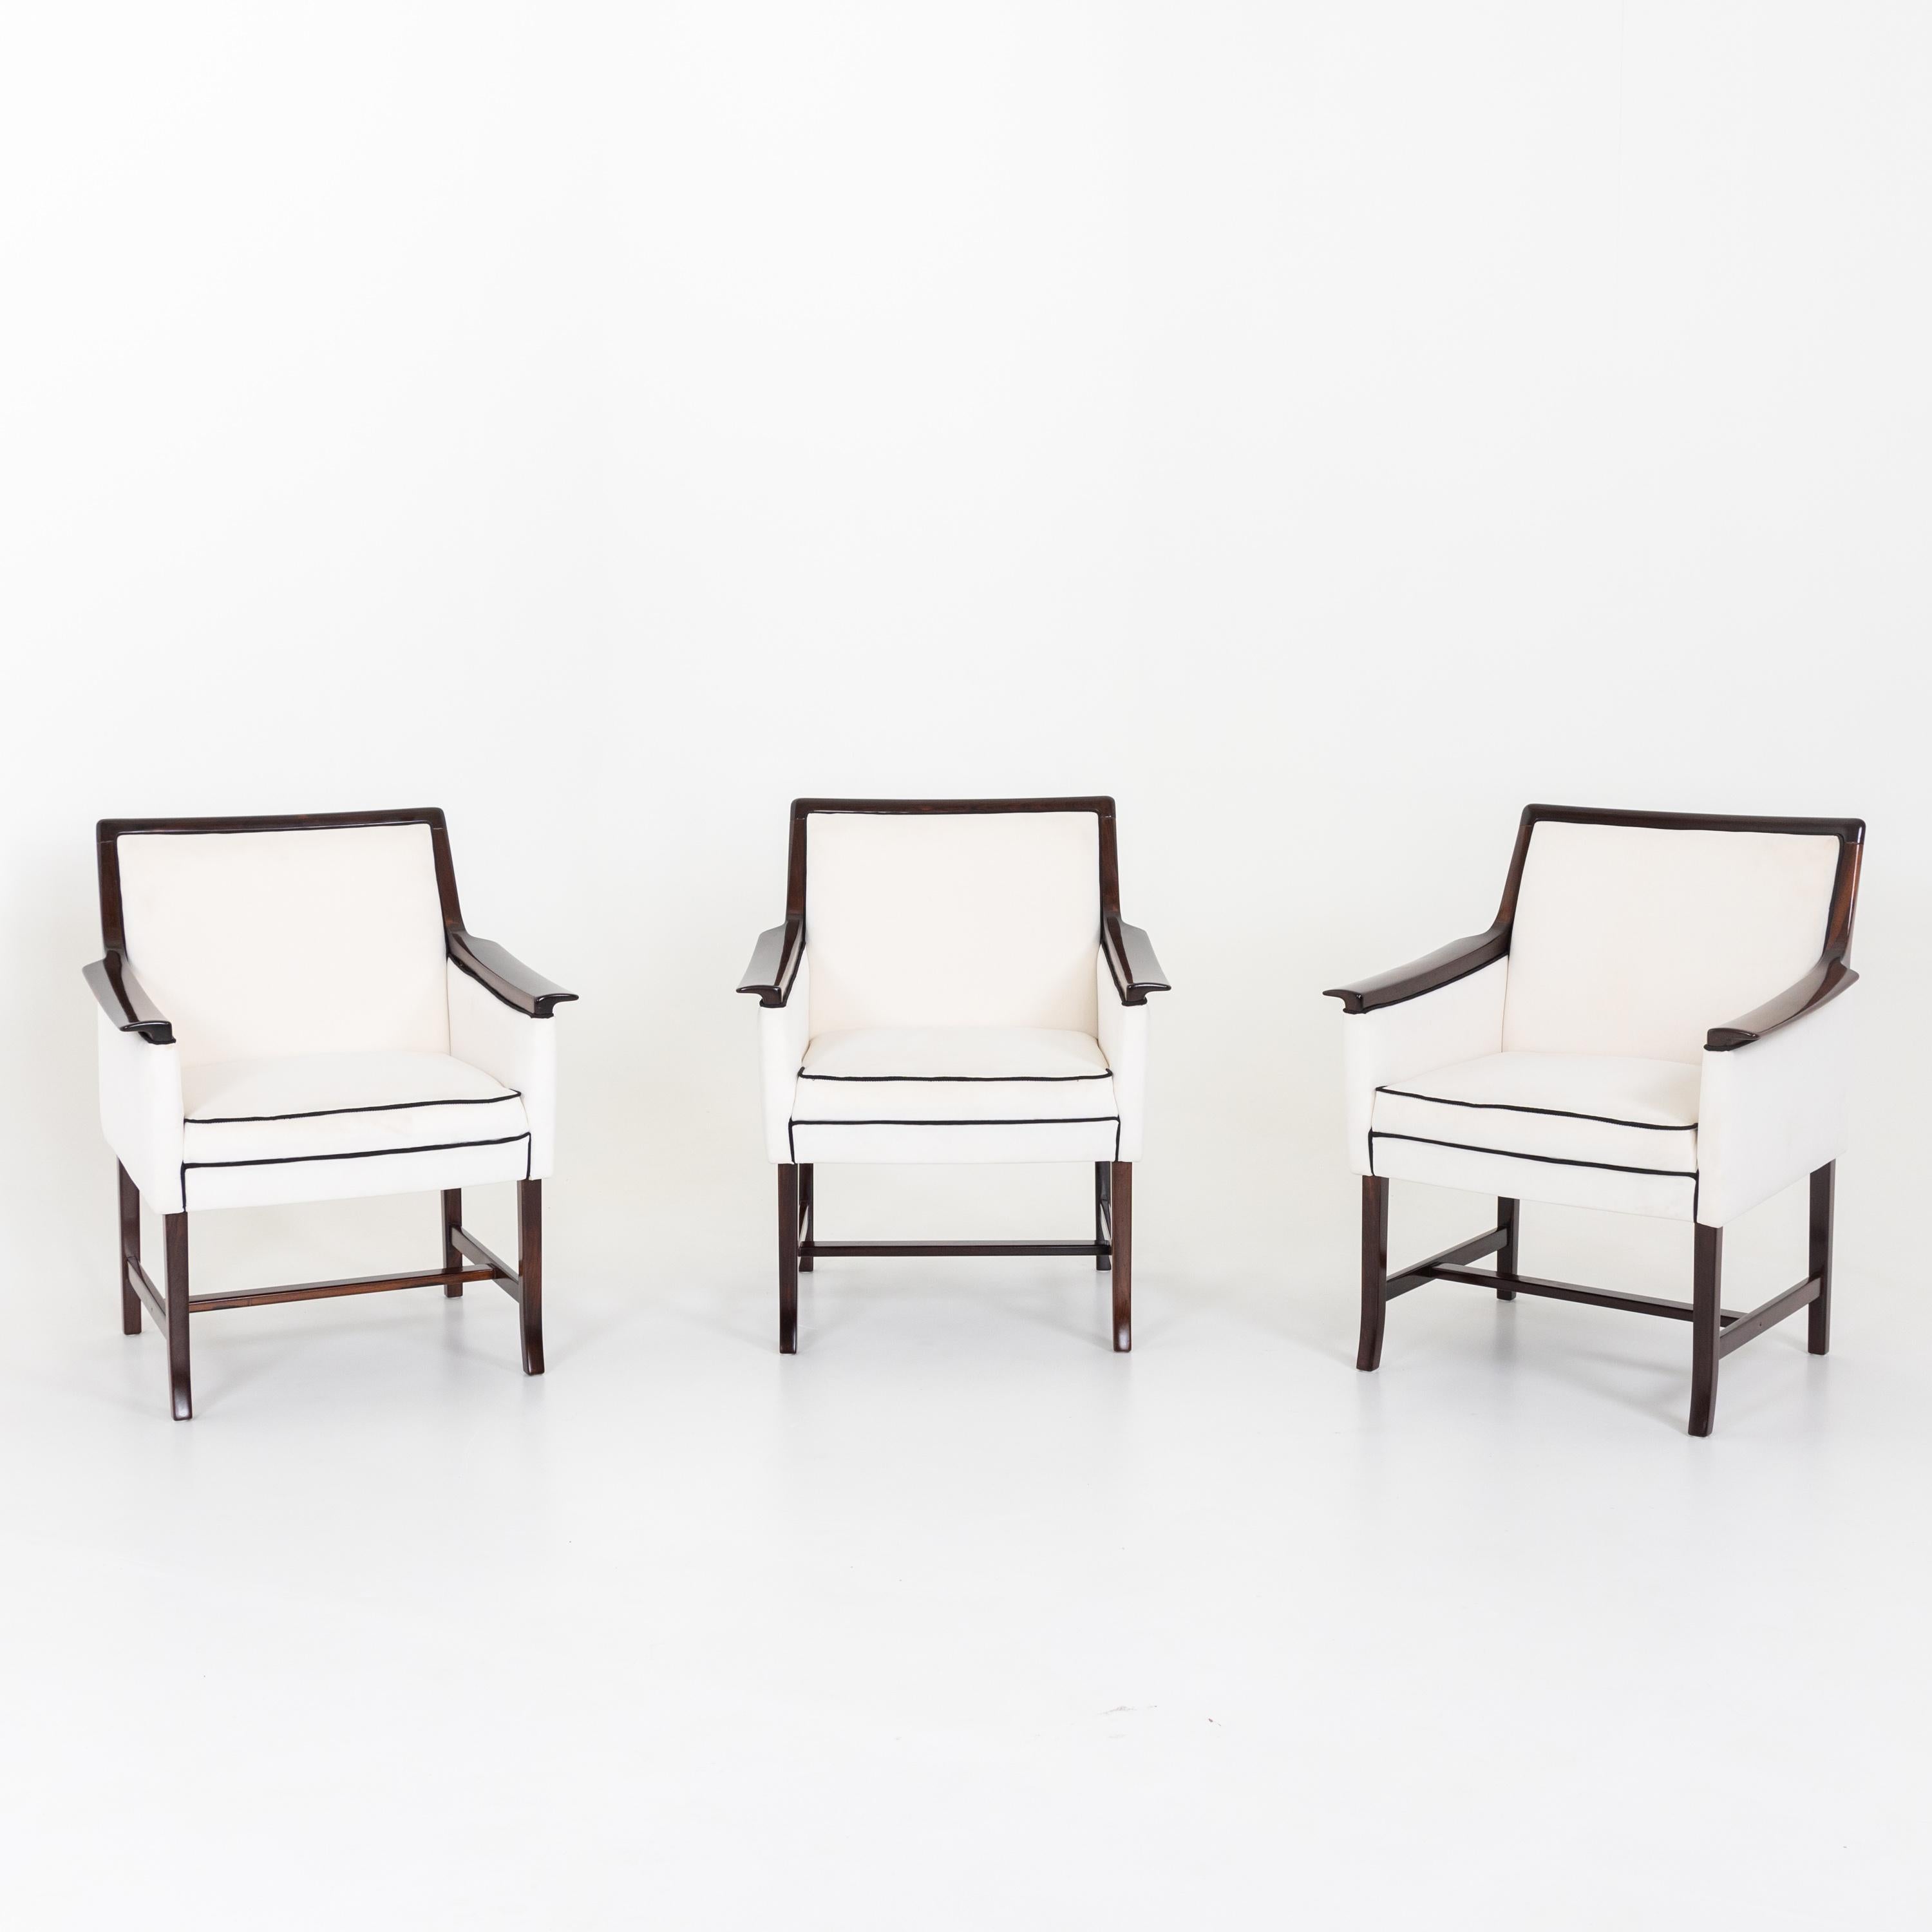 Set of three armchairs on slightly flared legs with H-shaped bracing and upholstered seats with elegant armrests. The chairs have been reupholstered and covered in a white fabric with black piping as well as hand polished.